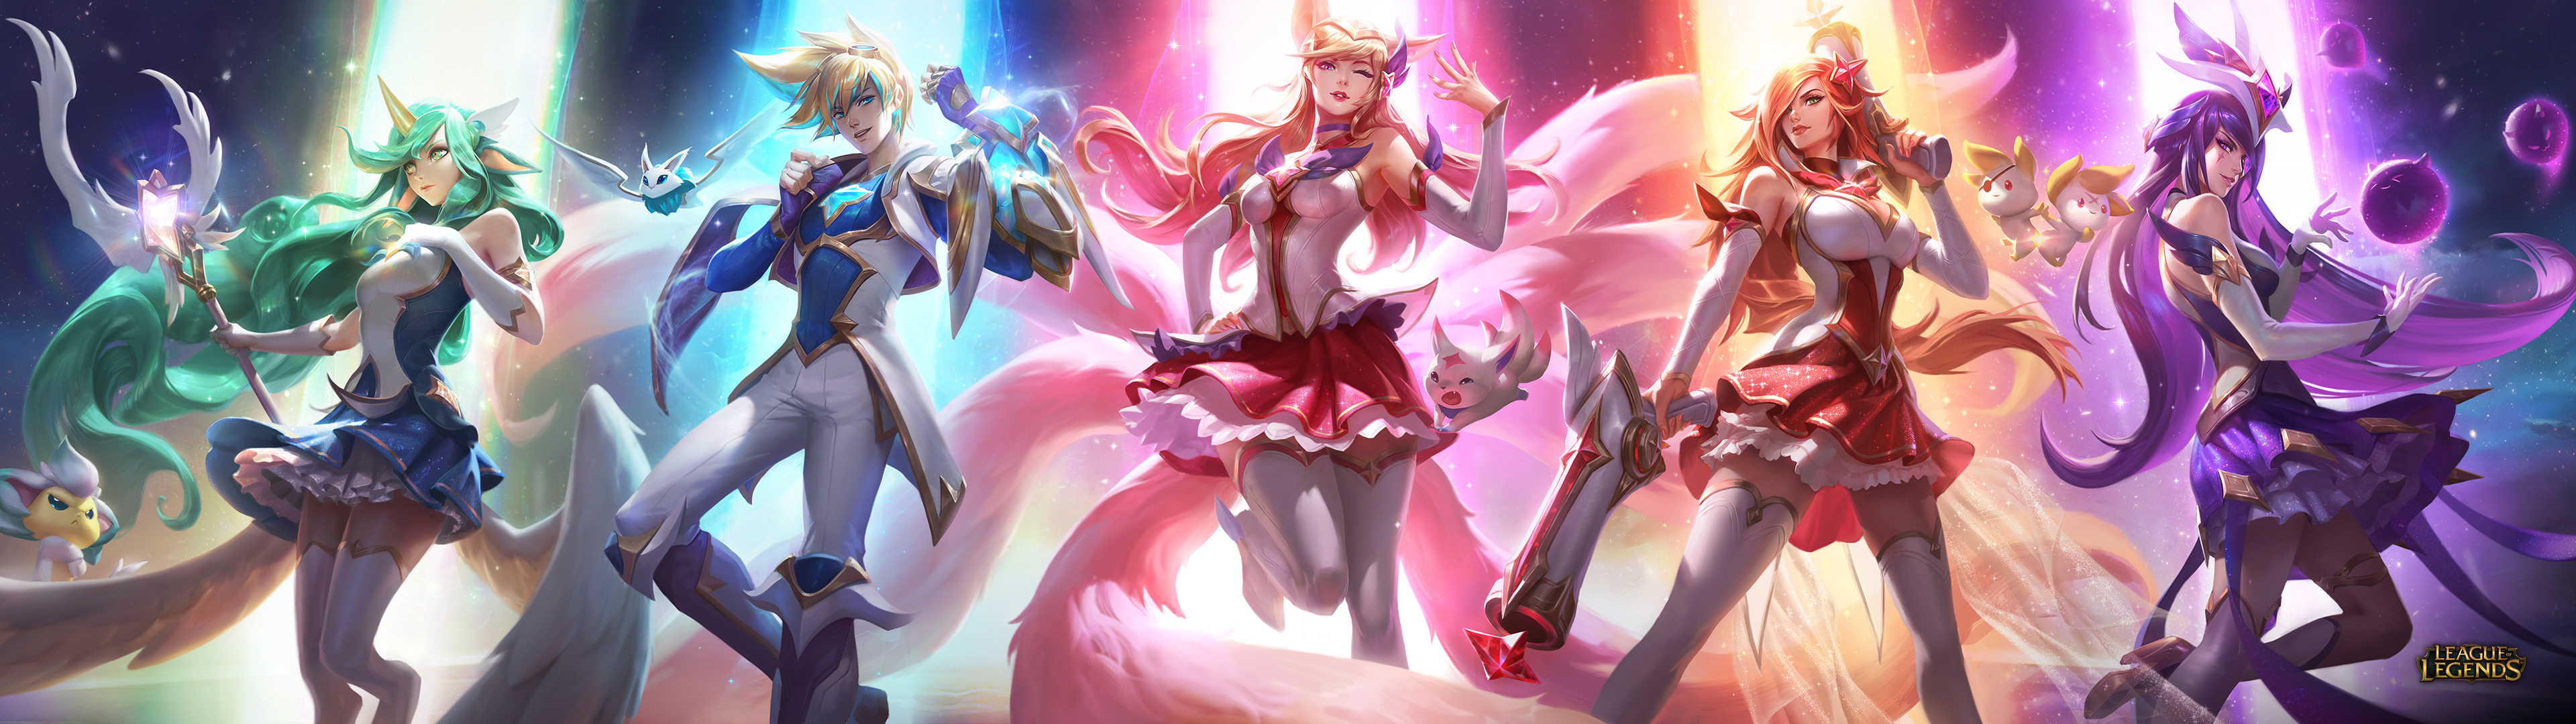 Anime 3840x1080 Soraka (League of Legends) Summoner's Rift League of Legends Ezreal (League Of Legends) Ahri (League of Legends) Miss Fortune (League of Legends) Star Guardian star trails pet gun space Star Guardian Soraka Star Guardian Ezreal Star Guardian Ahri Star Guardian Miss Fortune Syndra (League of Legends) video game girls group of women video game characters PC gaming